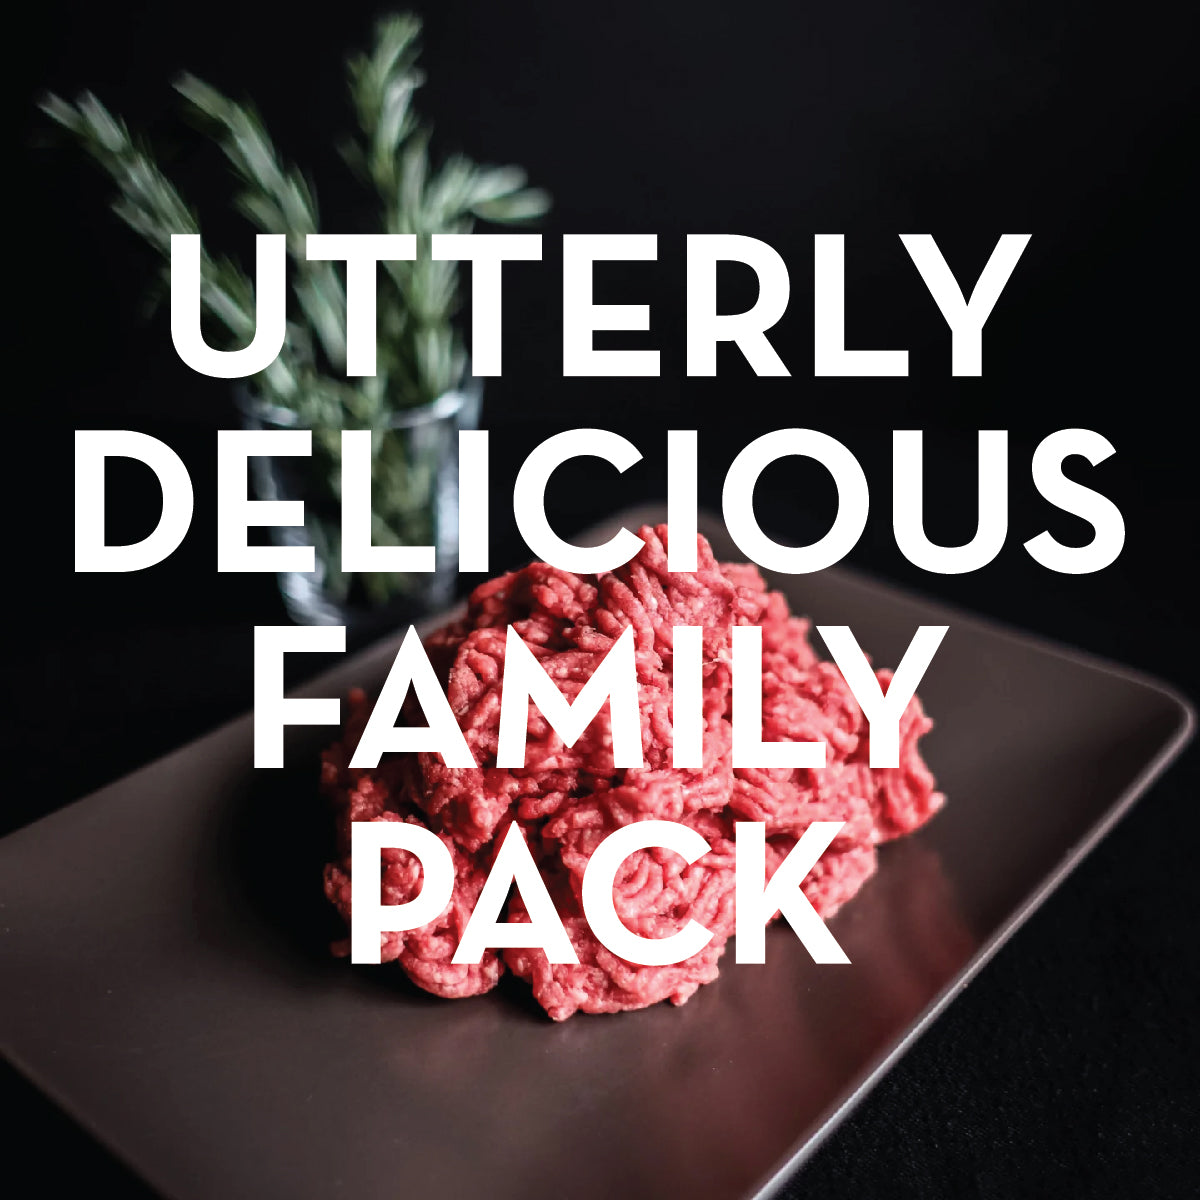 Utterly Delicious Family Pack